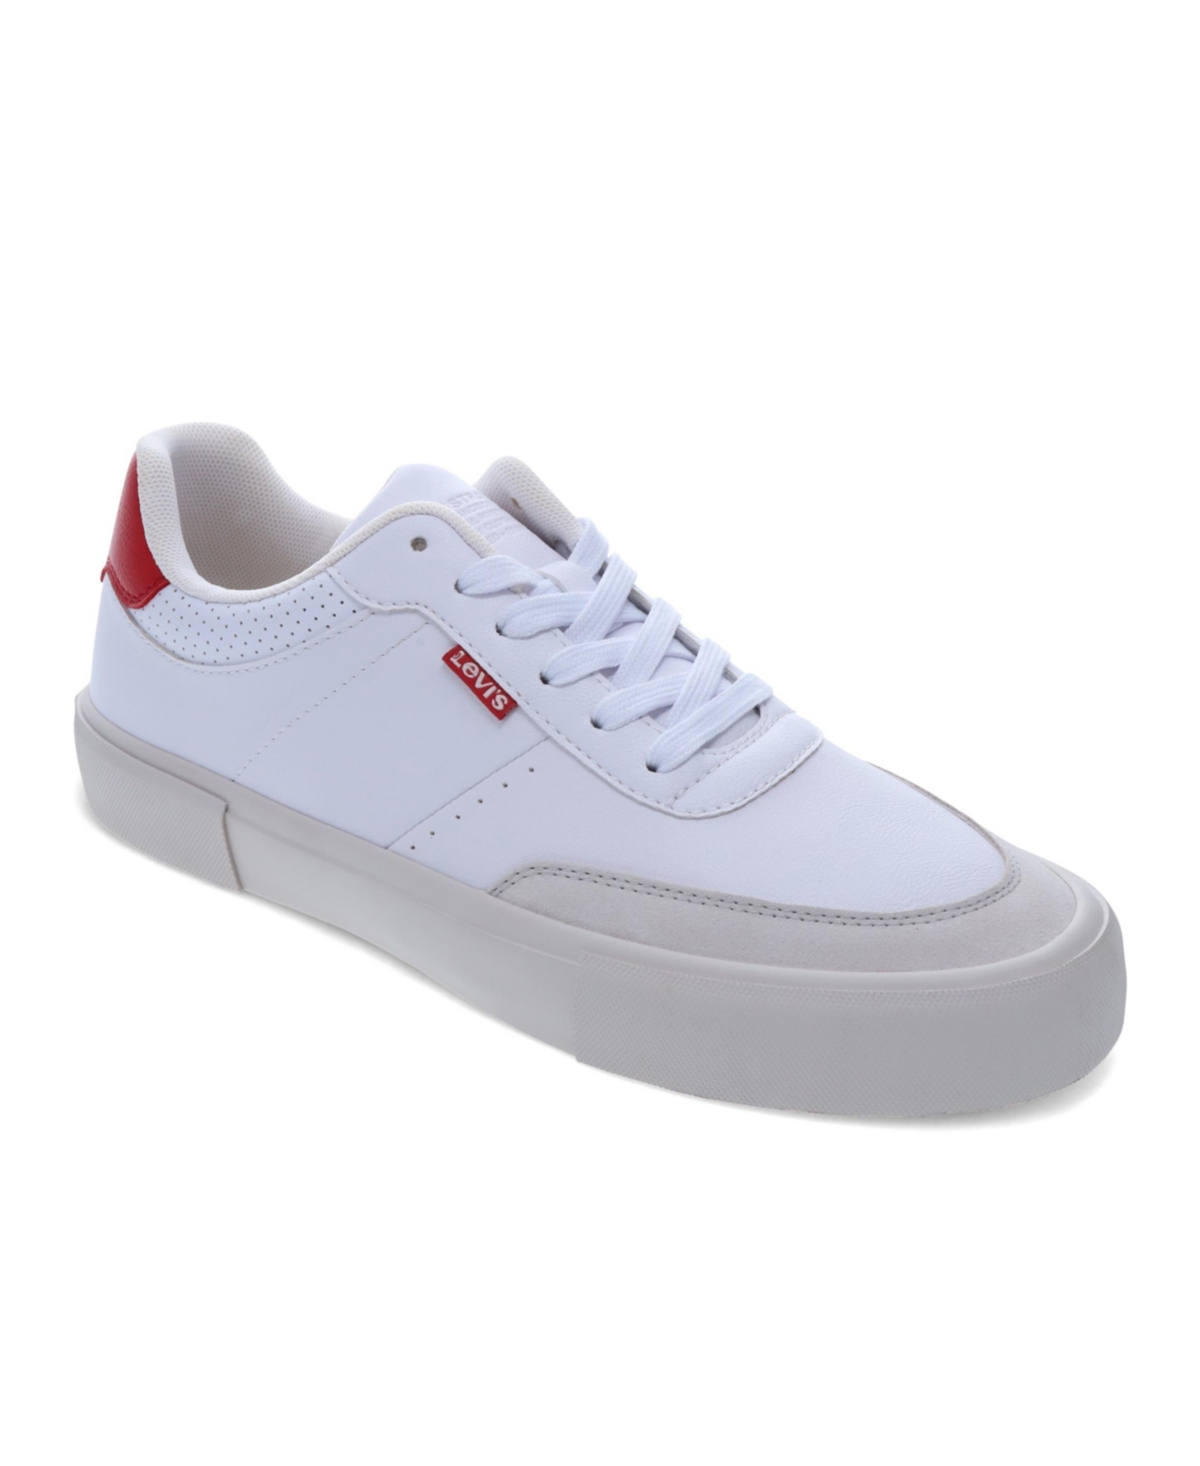 Men's Munro Faux-Leather Retro Low Top Sneakers - White, Gray, Red